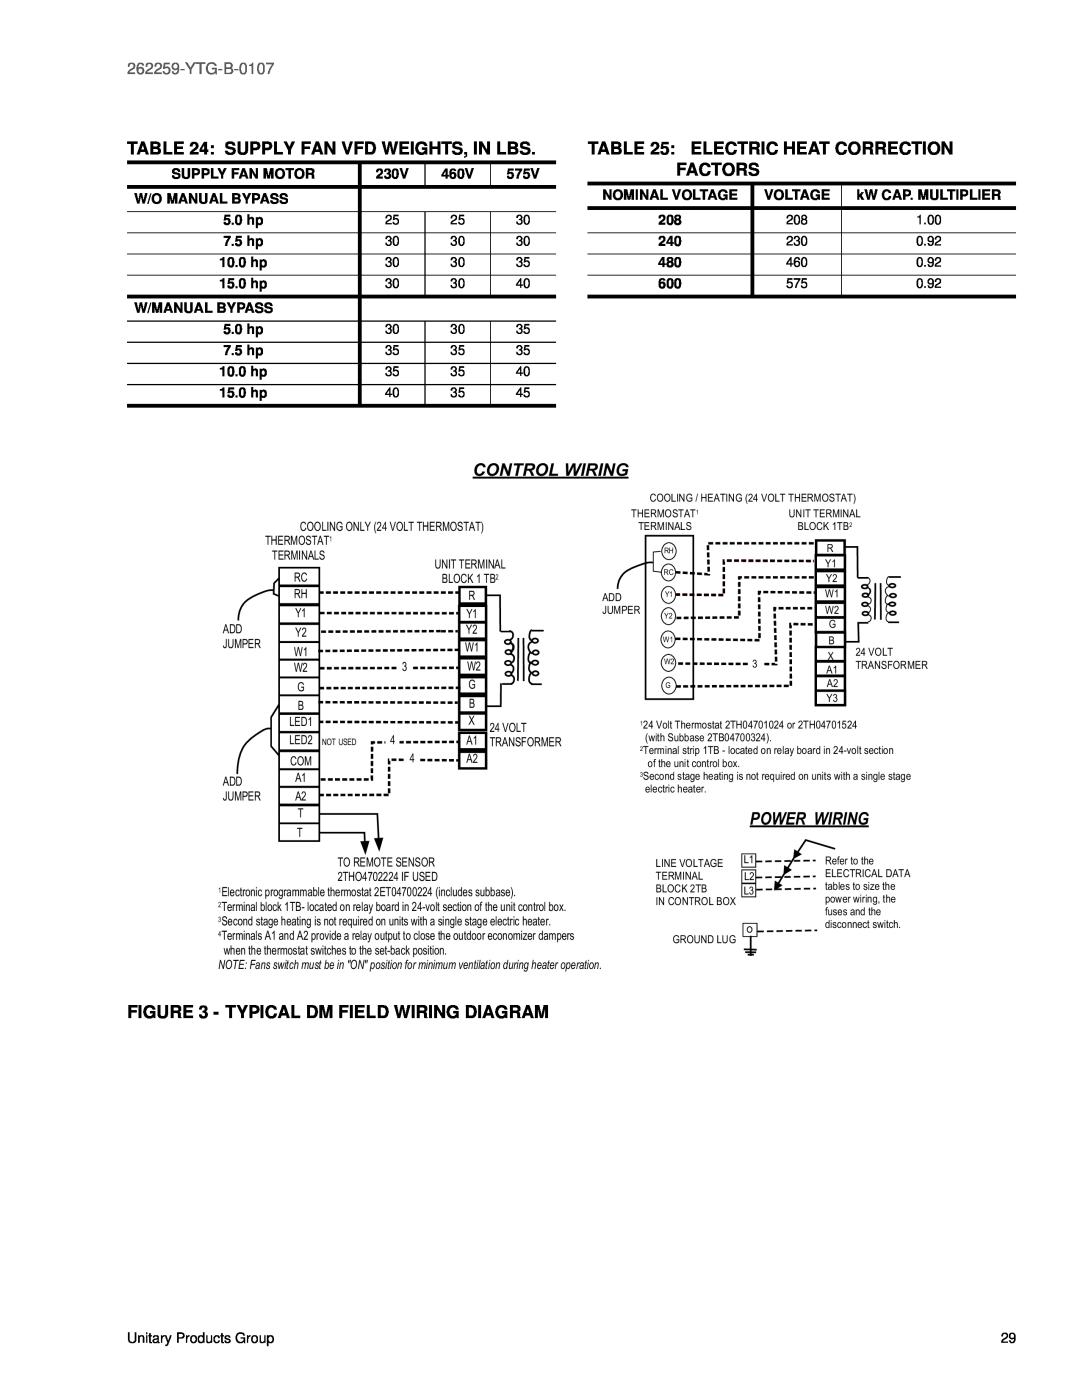 York DM 180 Supply Fan Vfd Weights, In Lbs, Electric Heat Correction Factors, Typical Dm Field Wiring Diagram, YTG-B-0107 